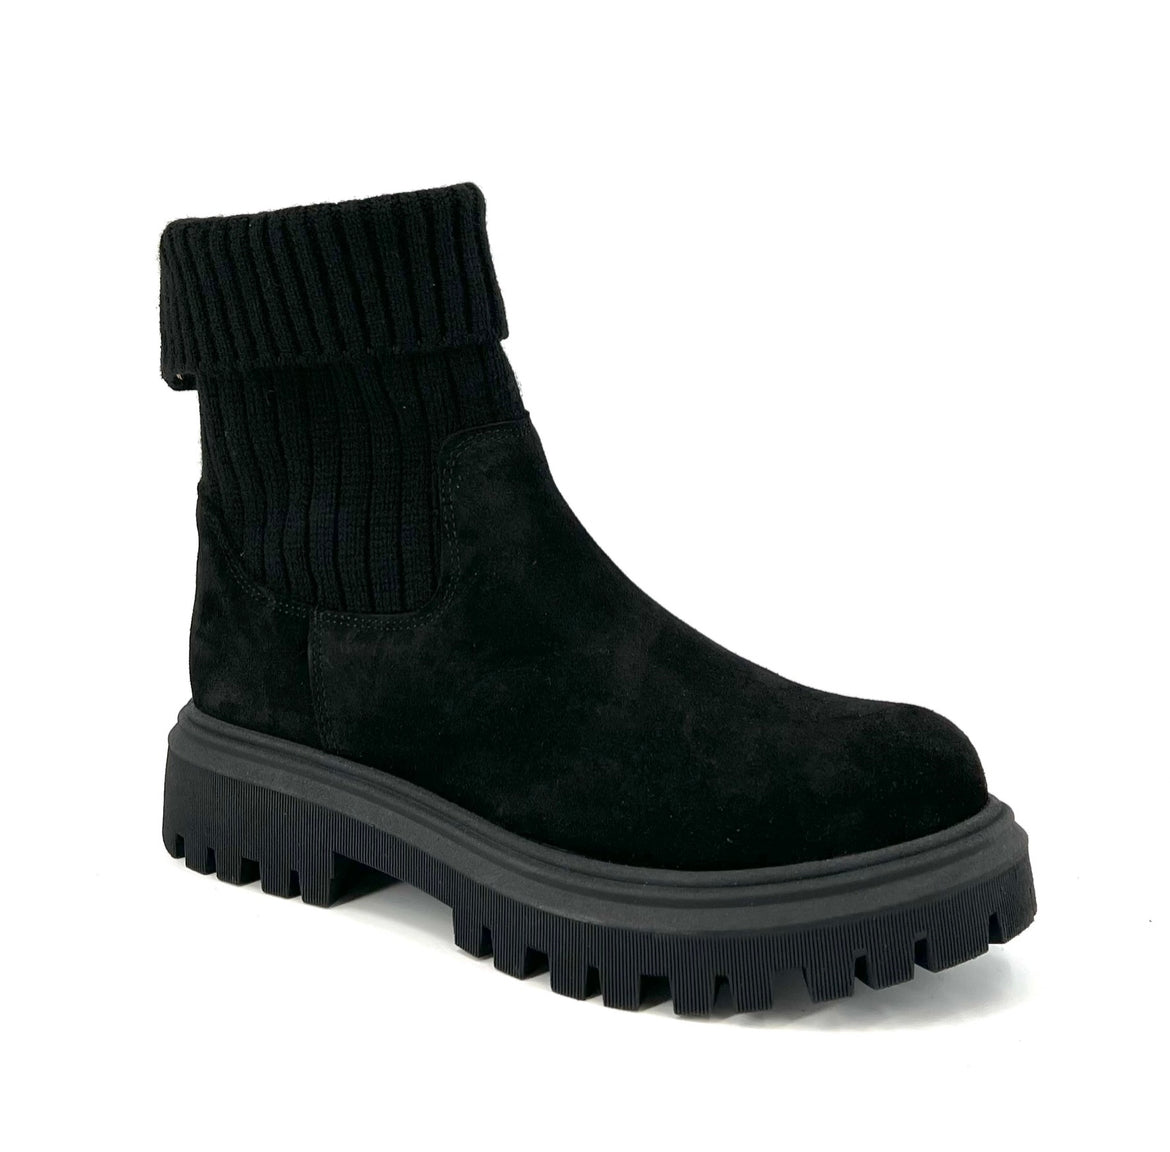 The Sweater Knit Elastic Shaft Bootie in Black